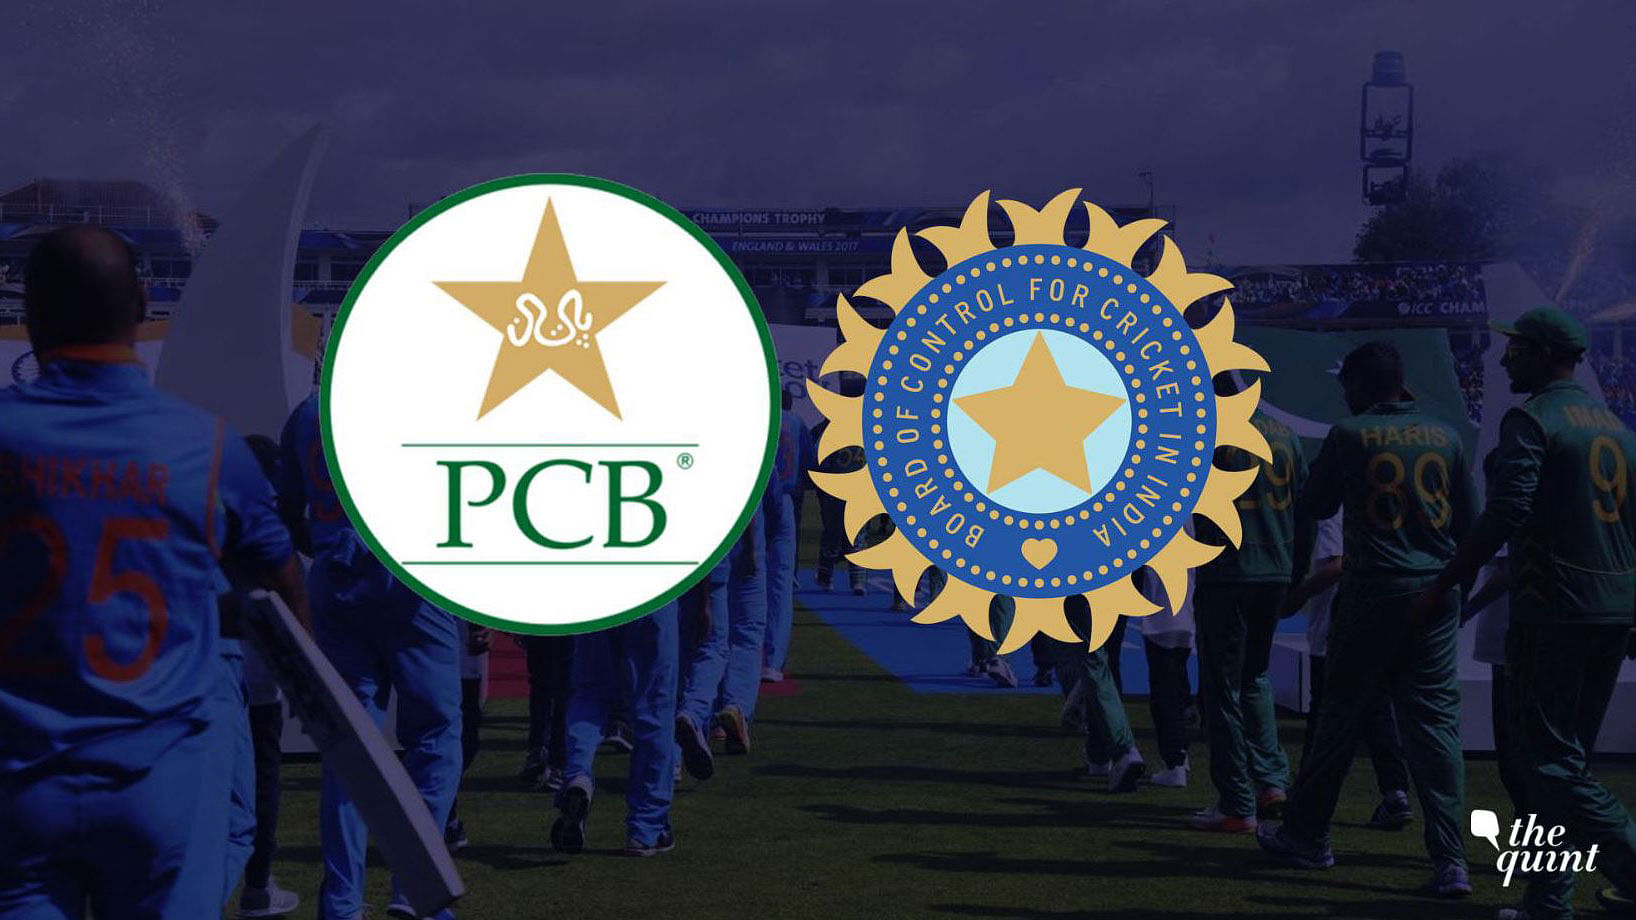 The ICC Dispute Resolution Forum heard a compensation claim case between the Board of Control for Cricket in India and Pakistan Cricket Board from 1-3 October in Dubai.